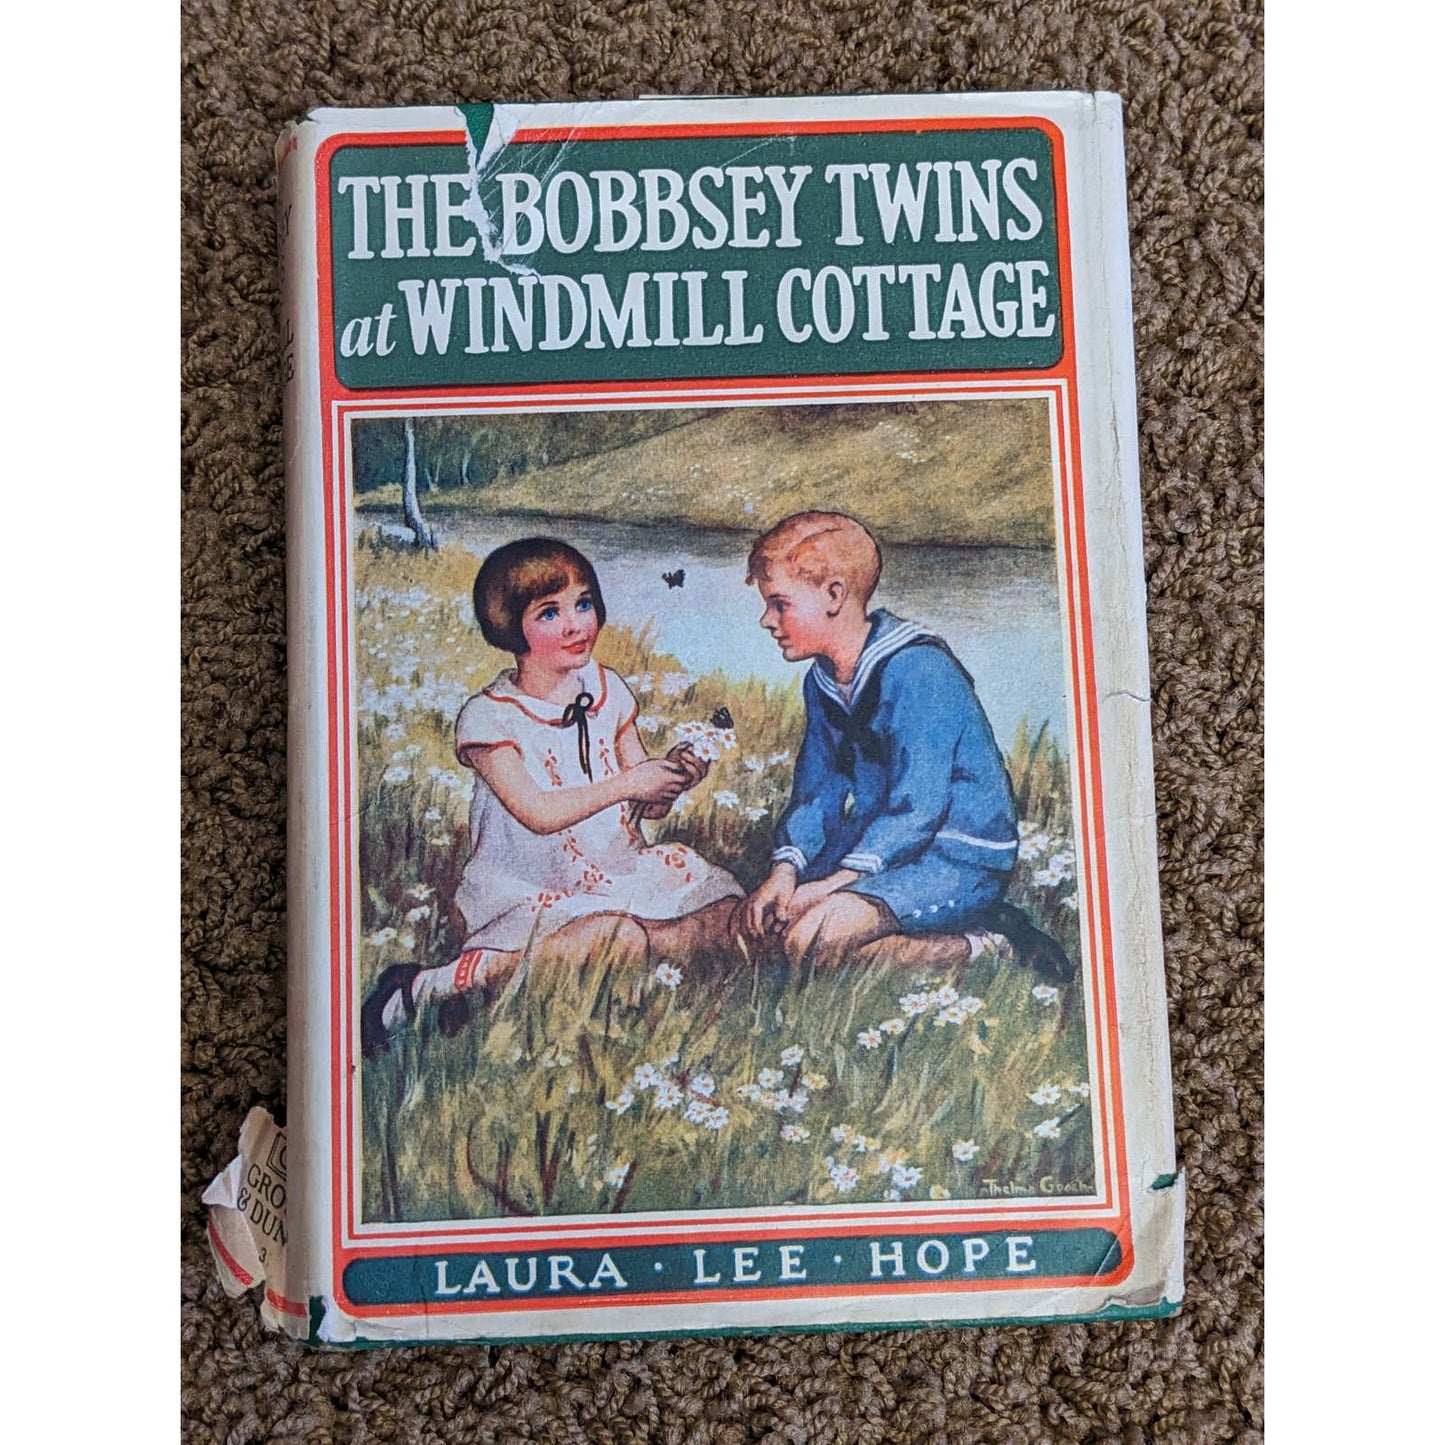 Bobbsey Twins Books Lot 4 In The Country Pony Trail At School By Laura Lee Hope